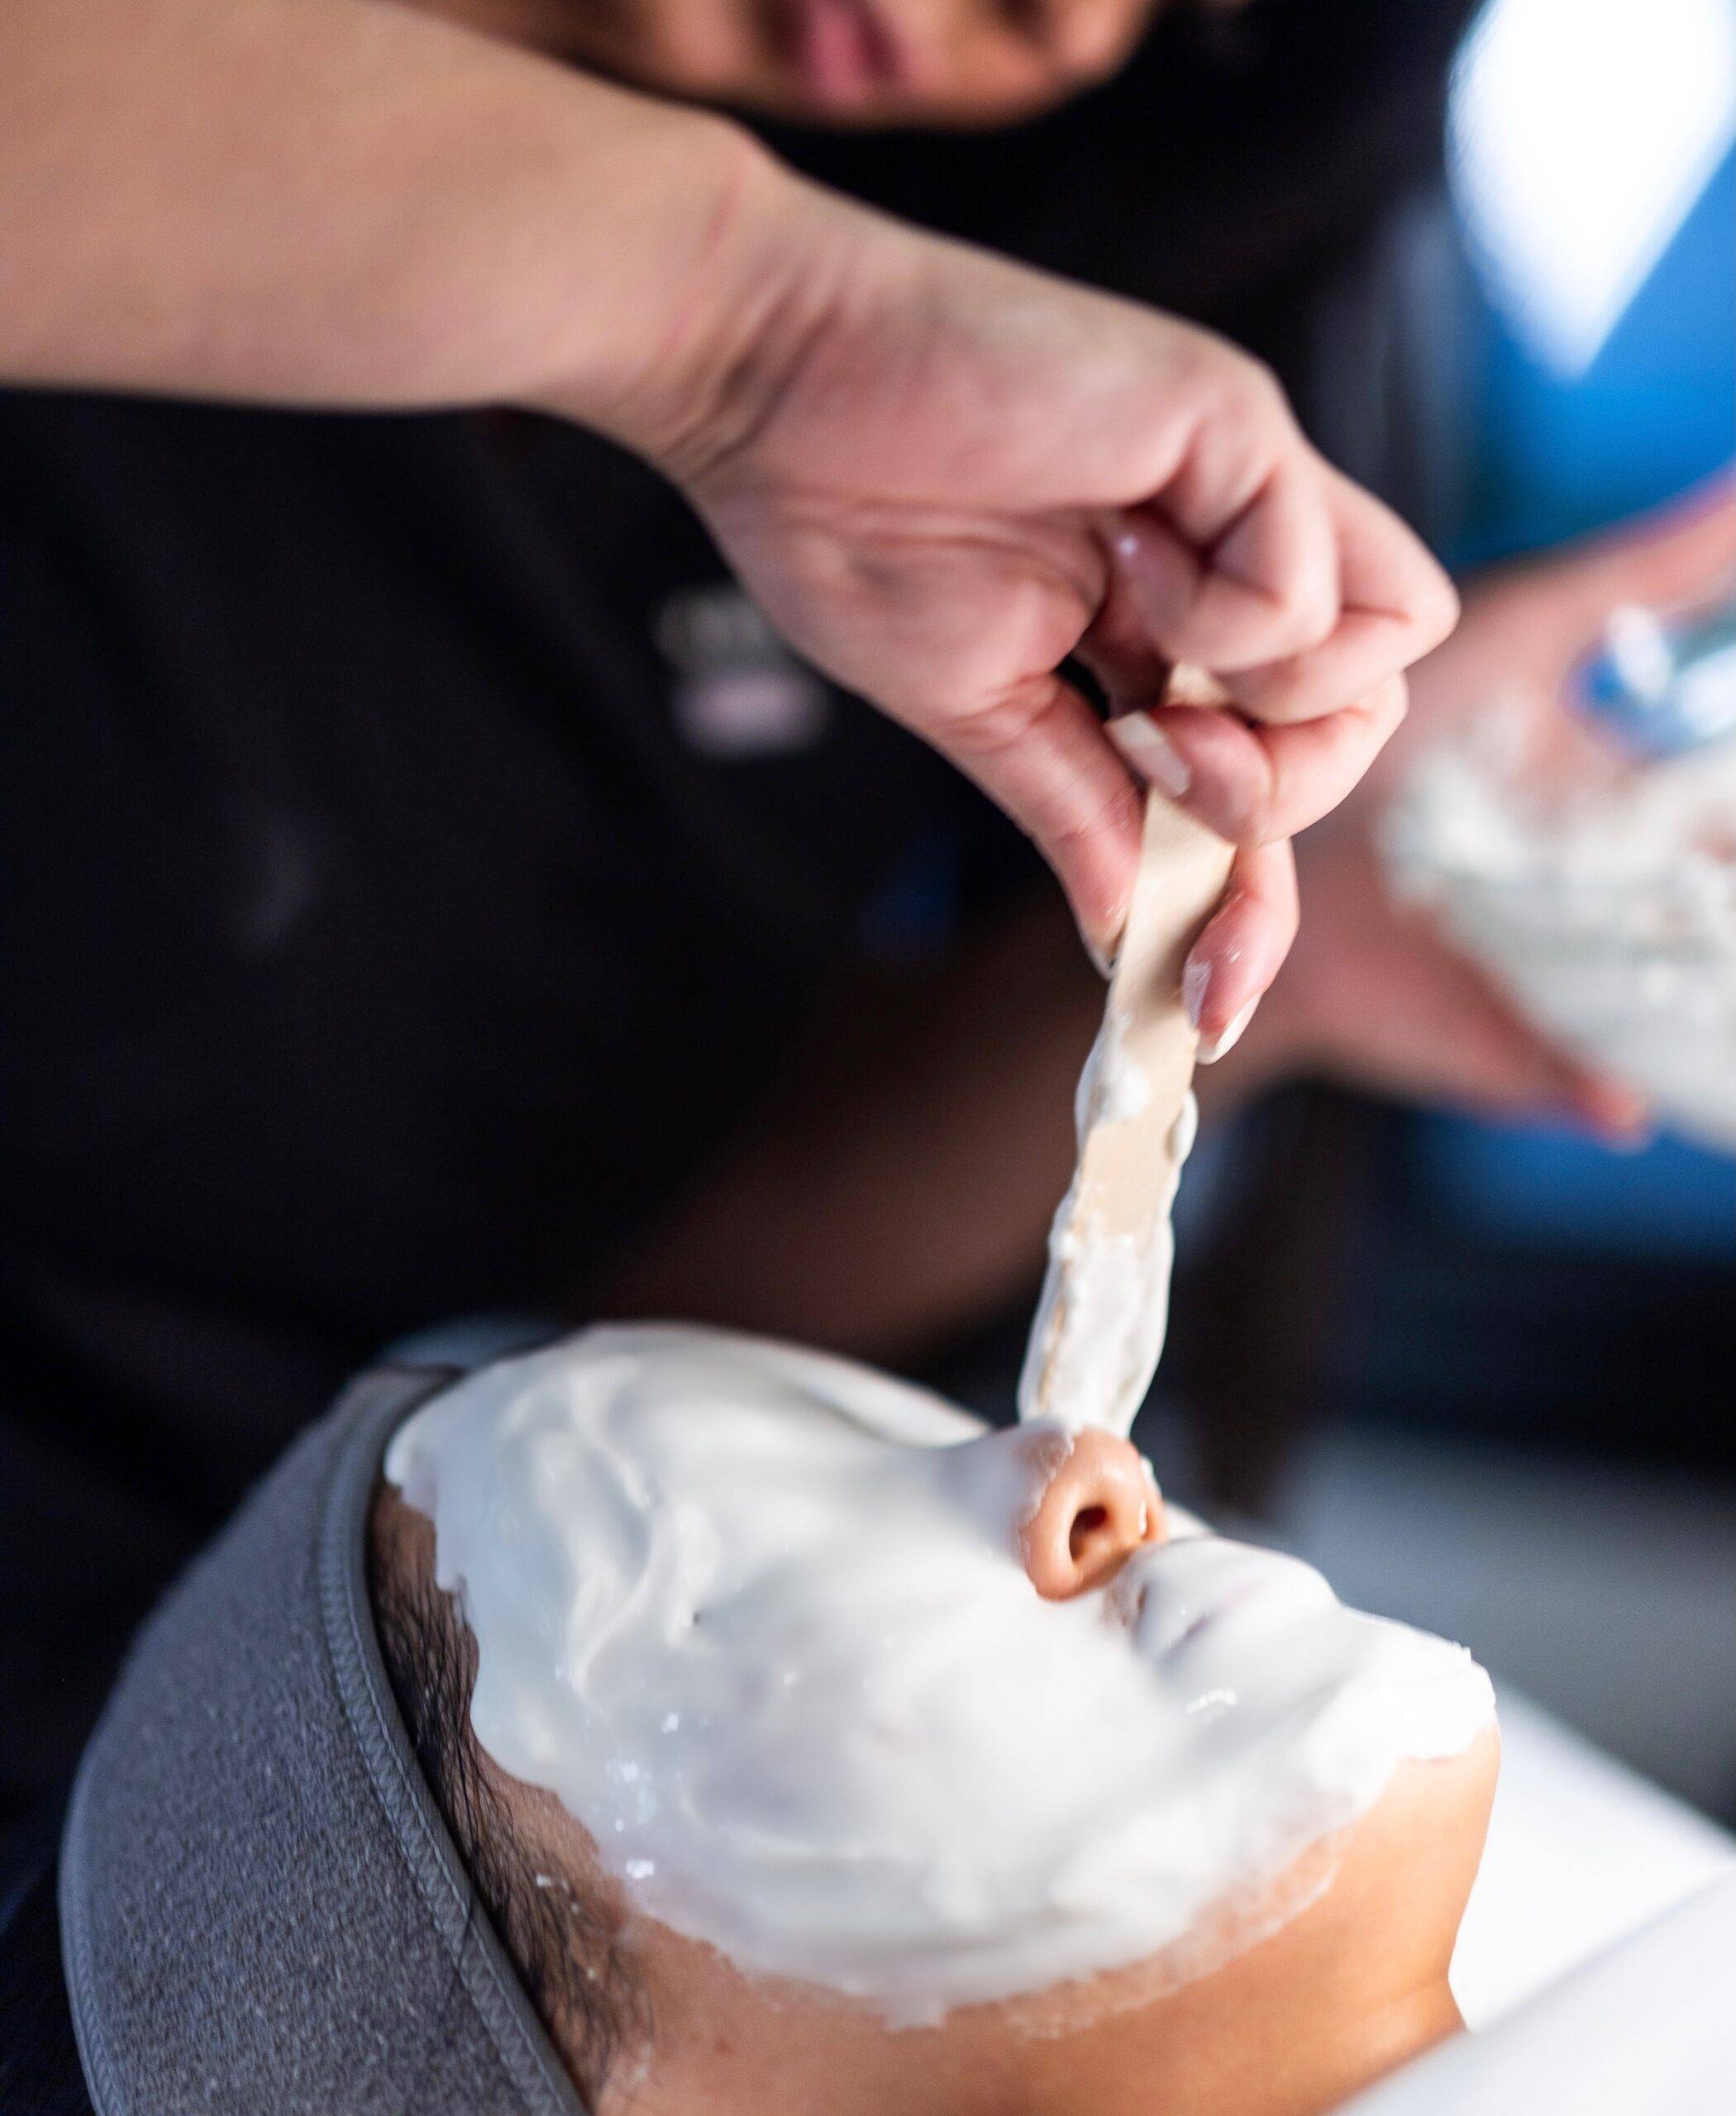 A person applies a thick layer of white cream on their face using a spatula, with focus on their hands and the skin's surface, as part of a facial rejuvenation medifacial treatment.